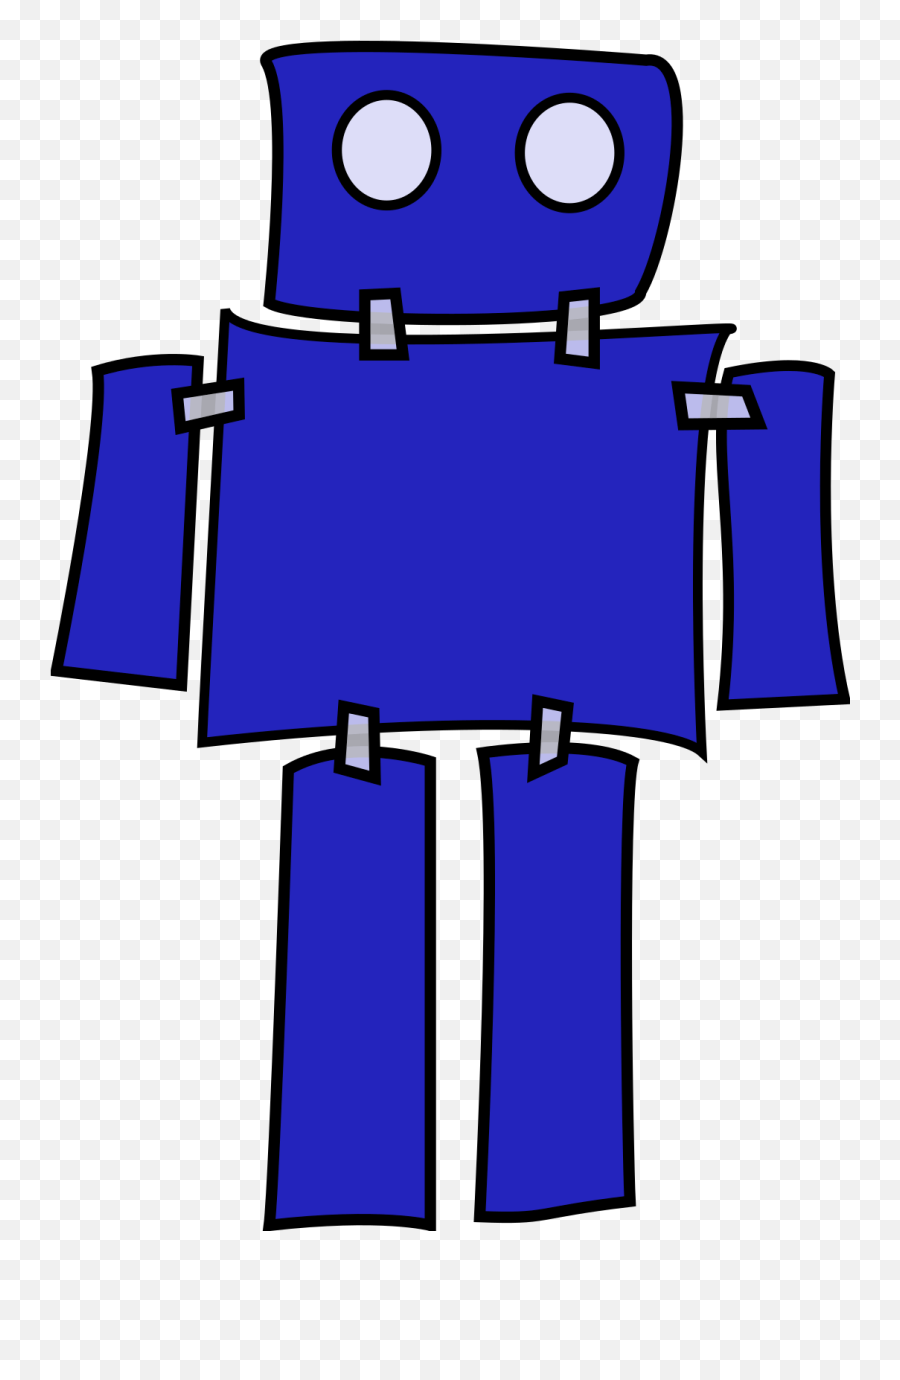 Blue Robot Clipart I2clipart - Royalty Free Public Domain Robot Clip Art Emoji,Robot Clipart